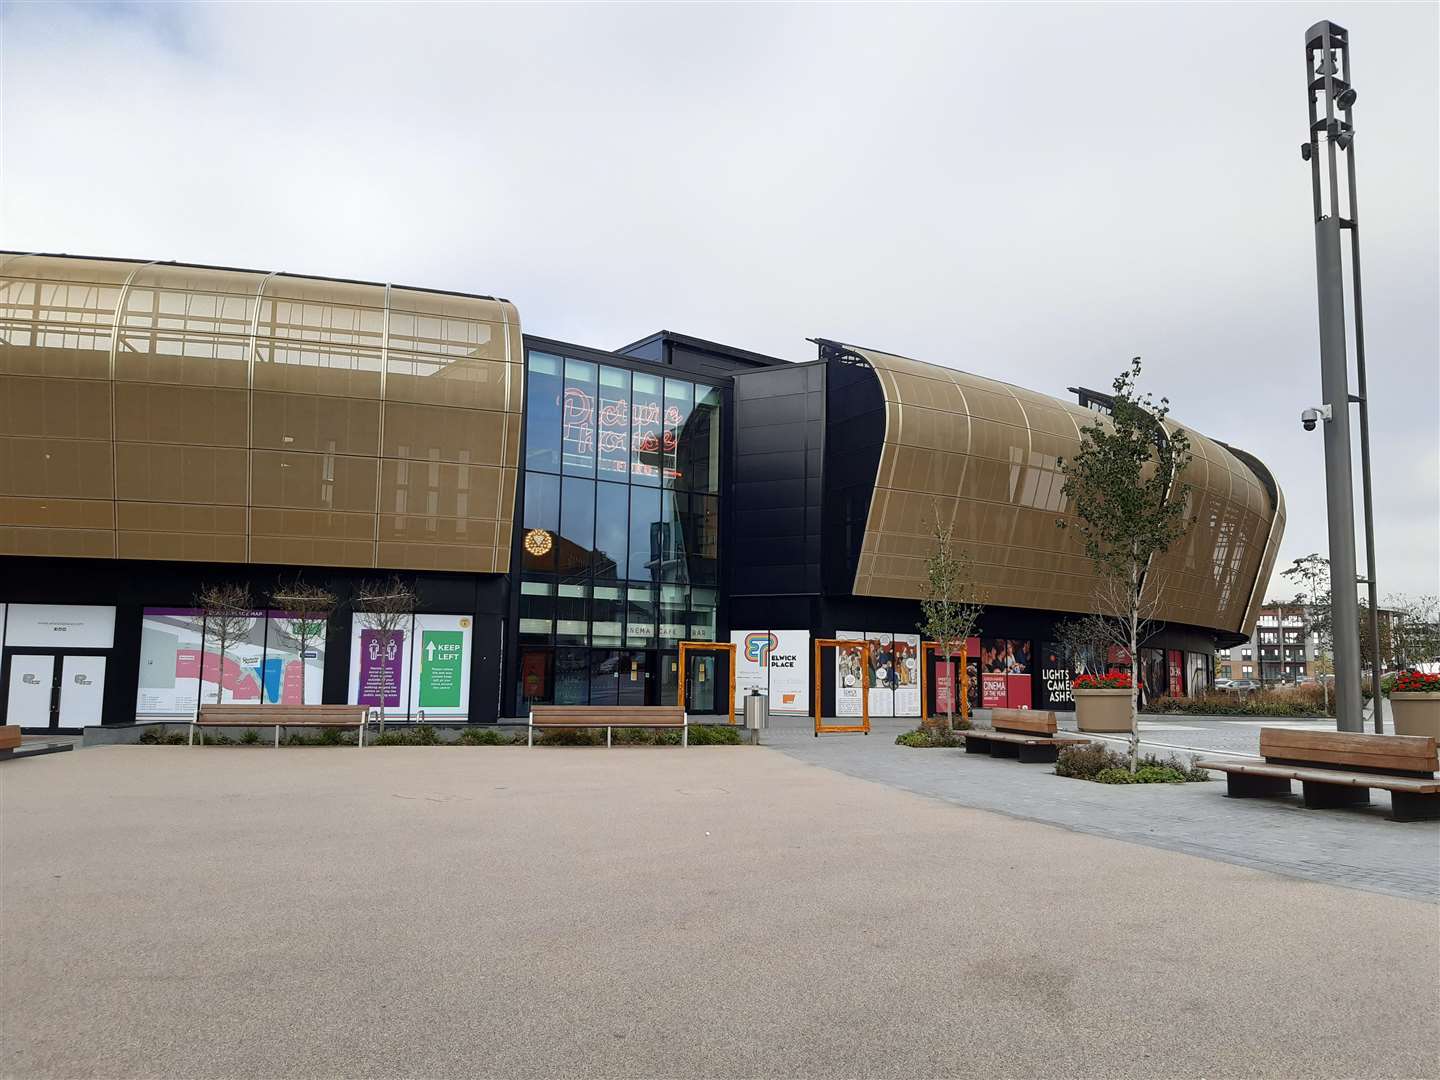 The announcement is a double blow for Ashford - which has a Picturehouse at Elwick Place and Cineworld at Eureka Park